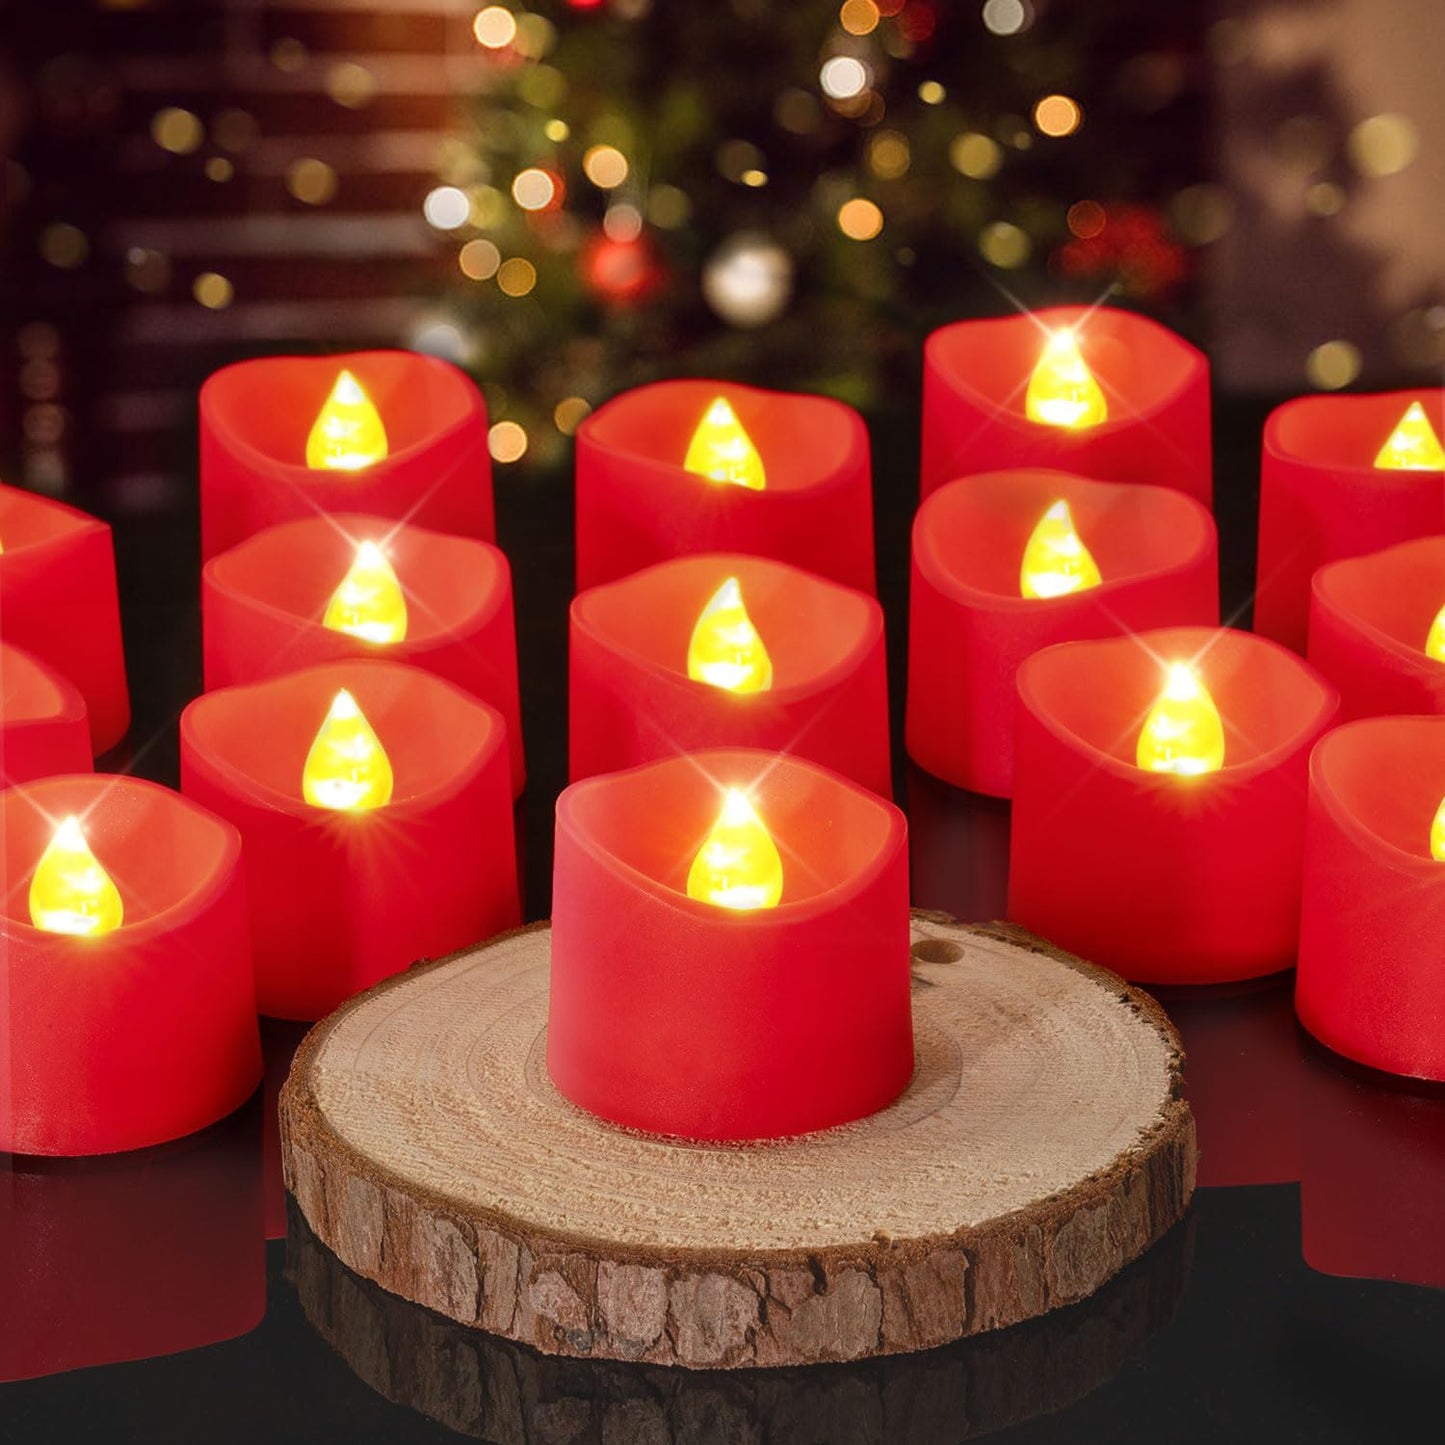 Homemory Red Tea Lights Candles Battery Operated, 12-Pack Flameless Votive Candles, 200+Hours Flickering LED Colored Tealights Candles for Halloween, Christmas, Theme Party, Wedding Table Decor